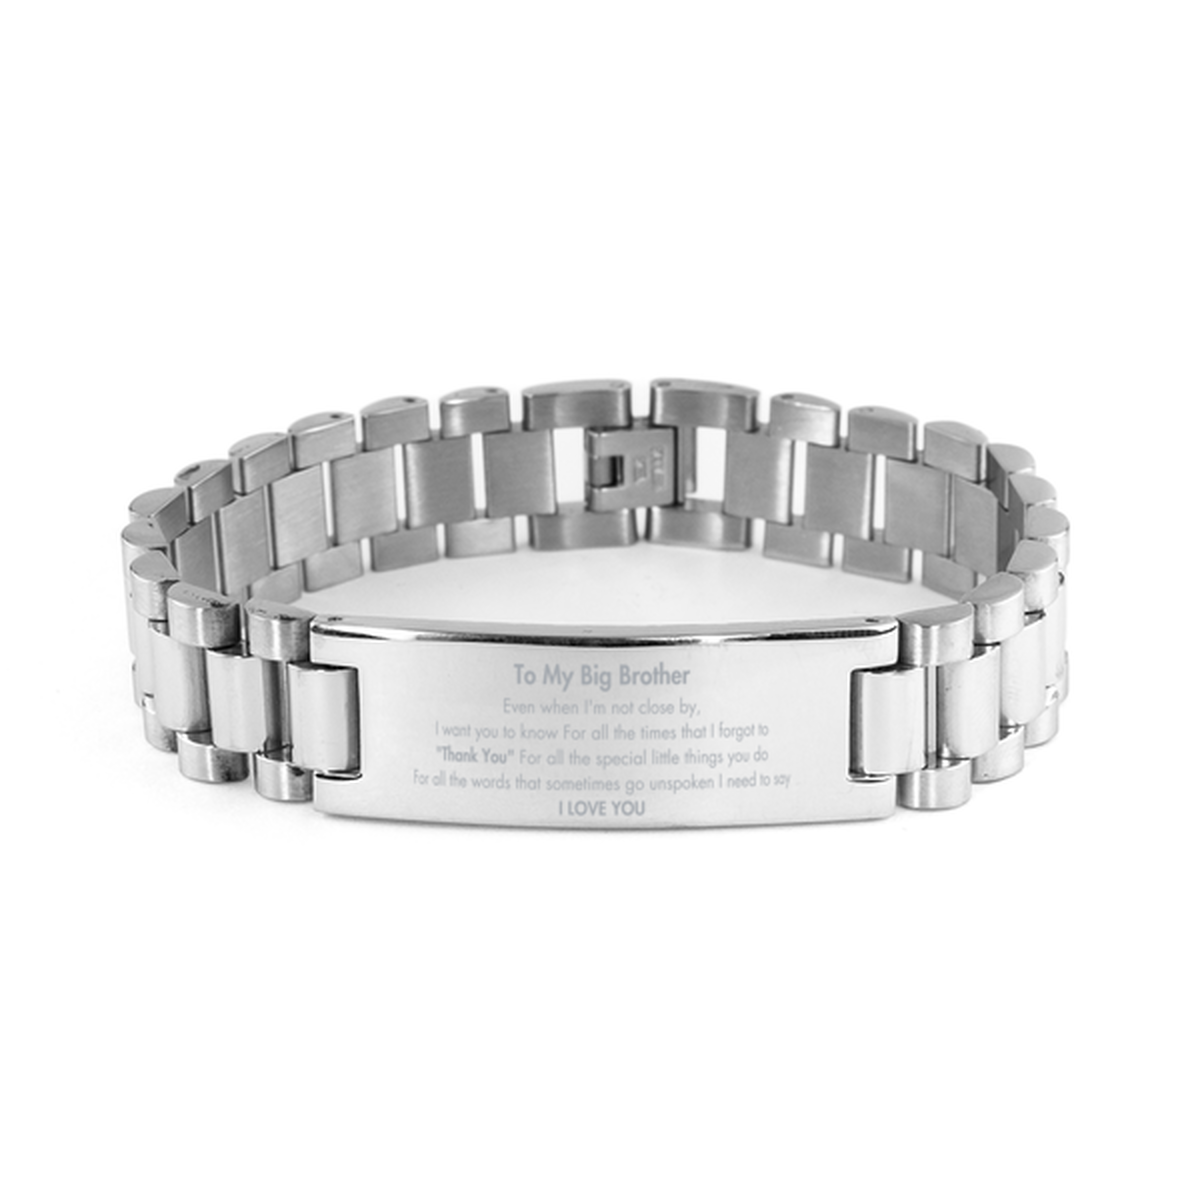 Thank You Gifts for Big Brother, Keepsake Ladder Stainless Steel Bracelet Gifts for Big Brother Birthday Mother's day Father's Day Big Brother For all the words That sometimes go unspoken I need to say I LOVE YOU